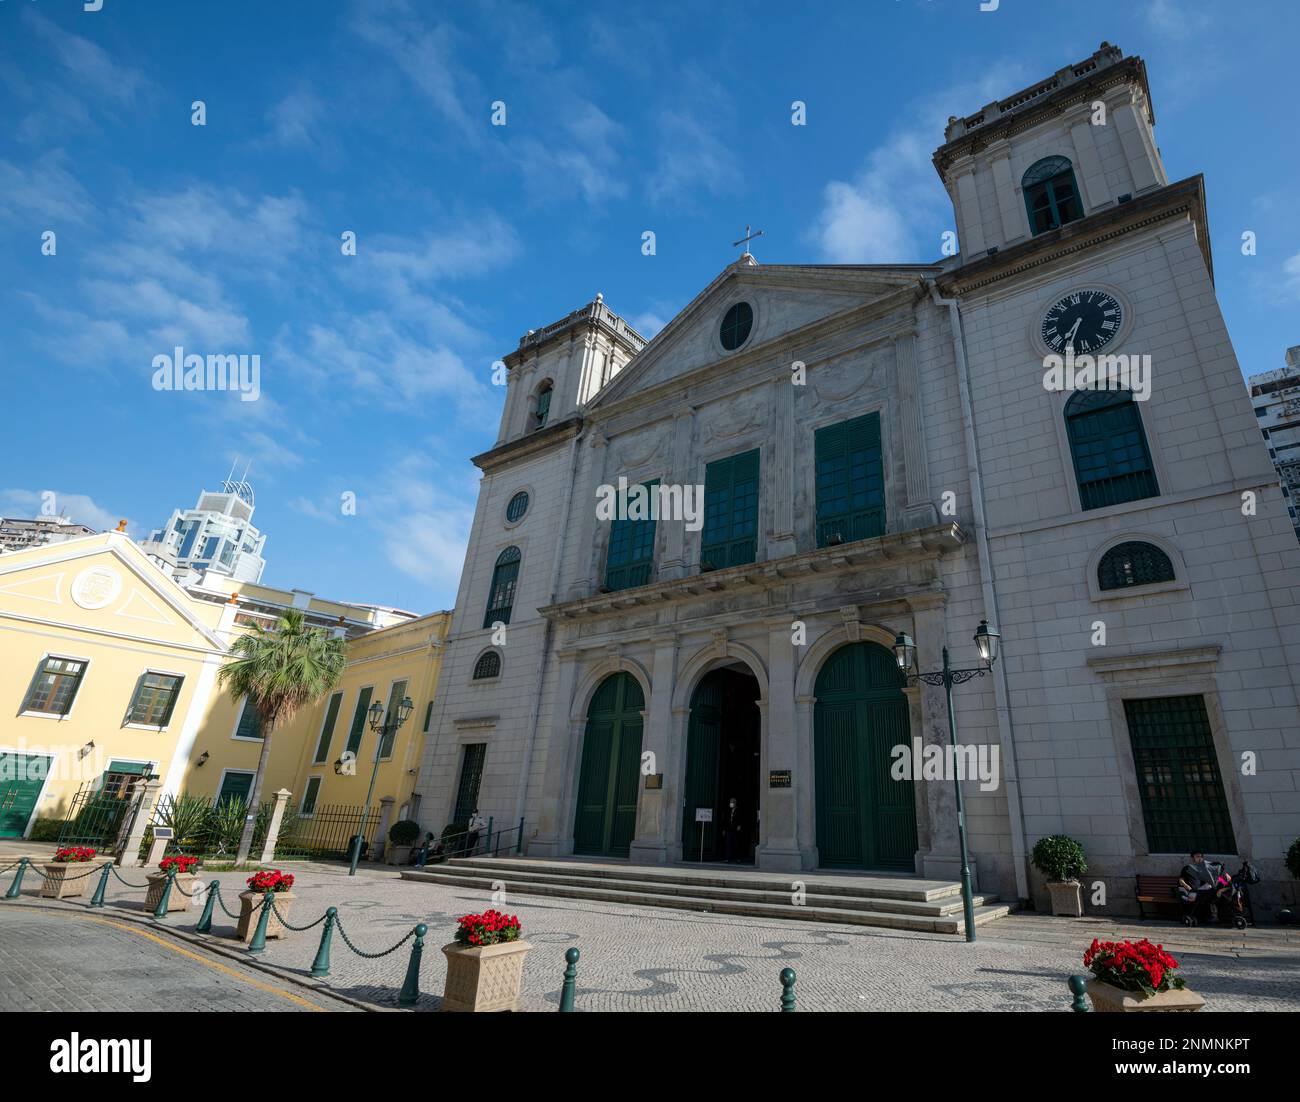 The Macau Cathedral, also known as Cathedral of the Nativity of Our Lady is listed as UNESCO World Heritage. Macau, China. Stock Photo